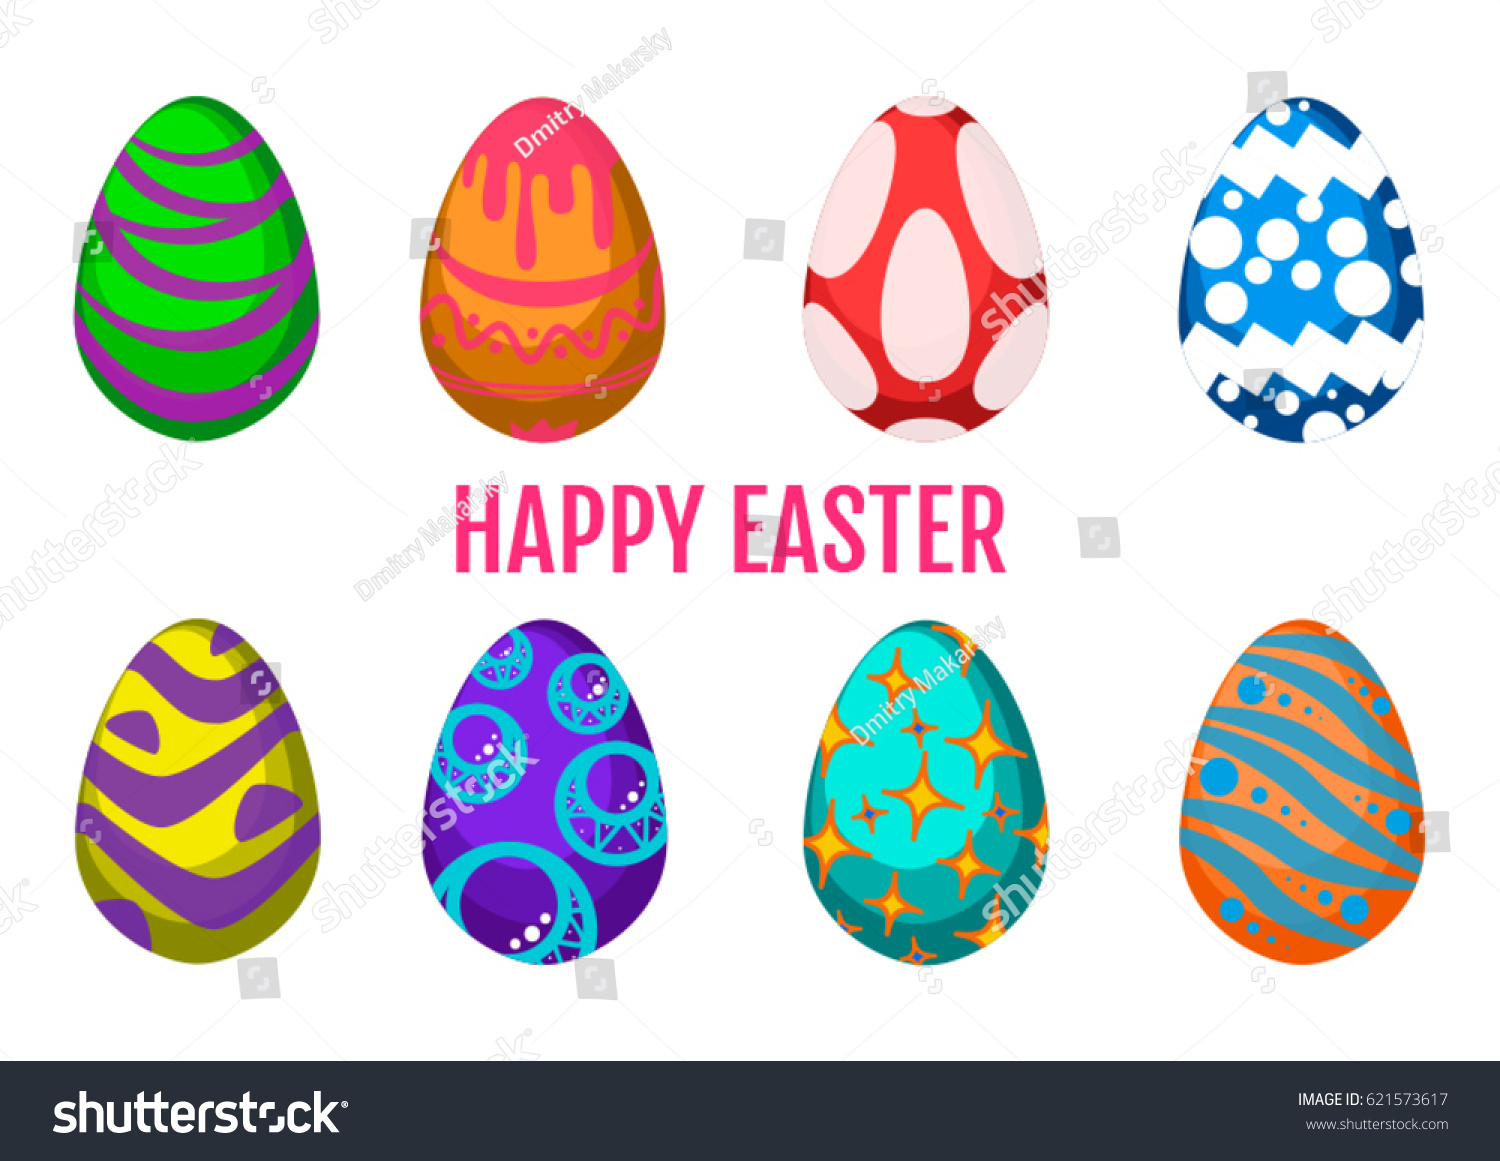 Some different easter eggs vector #621573617